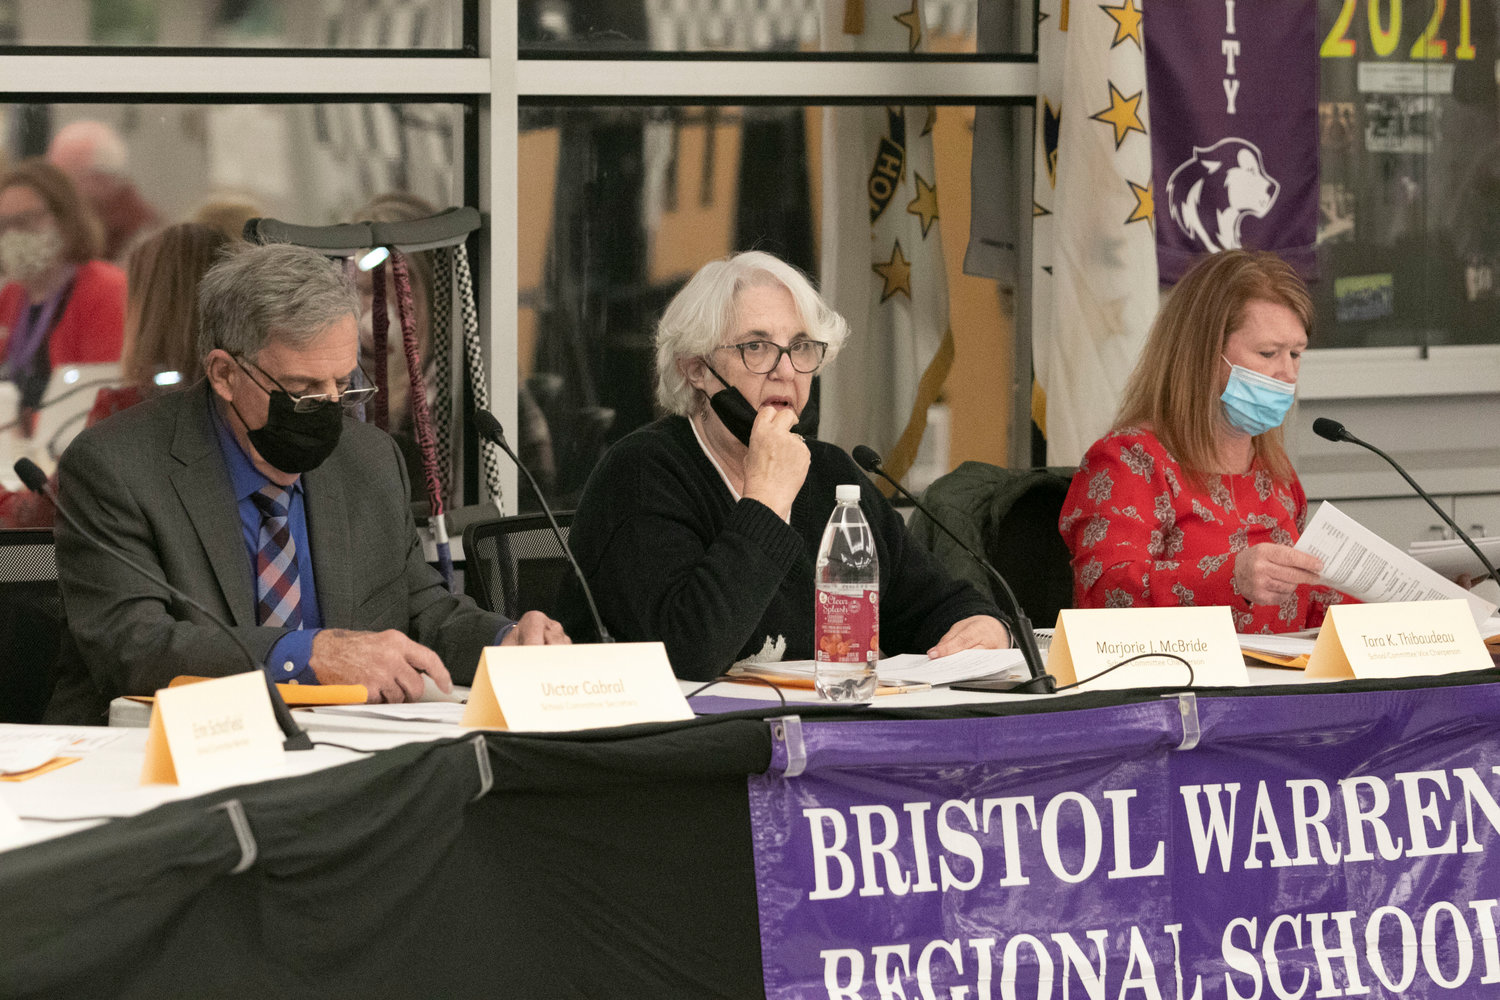 School Committee Chairperson Marjorie McBride informed the public that masks would be mandated and enforced at the beginning of the meeting. To her right, Vice Chairperson Tara Thibaudeau opted to wear a mask during the meeting as well.